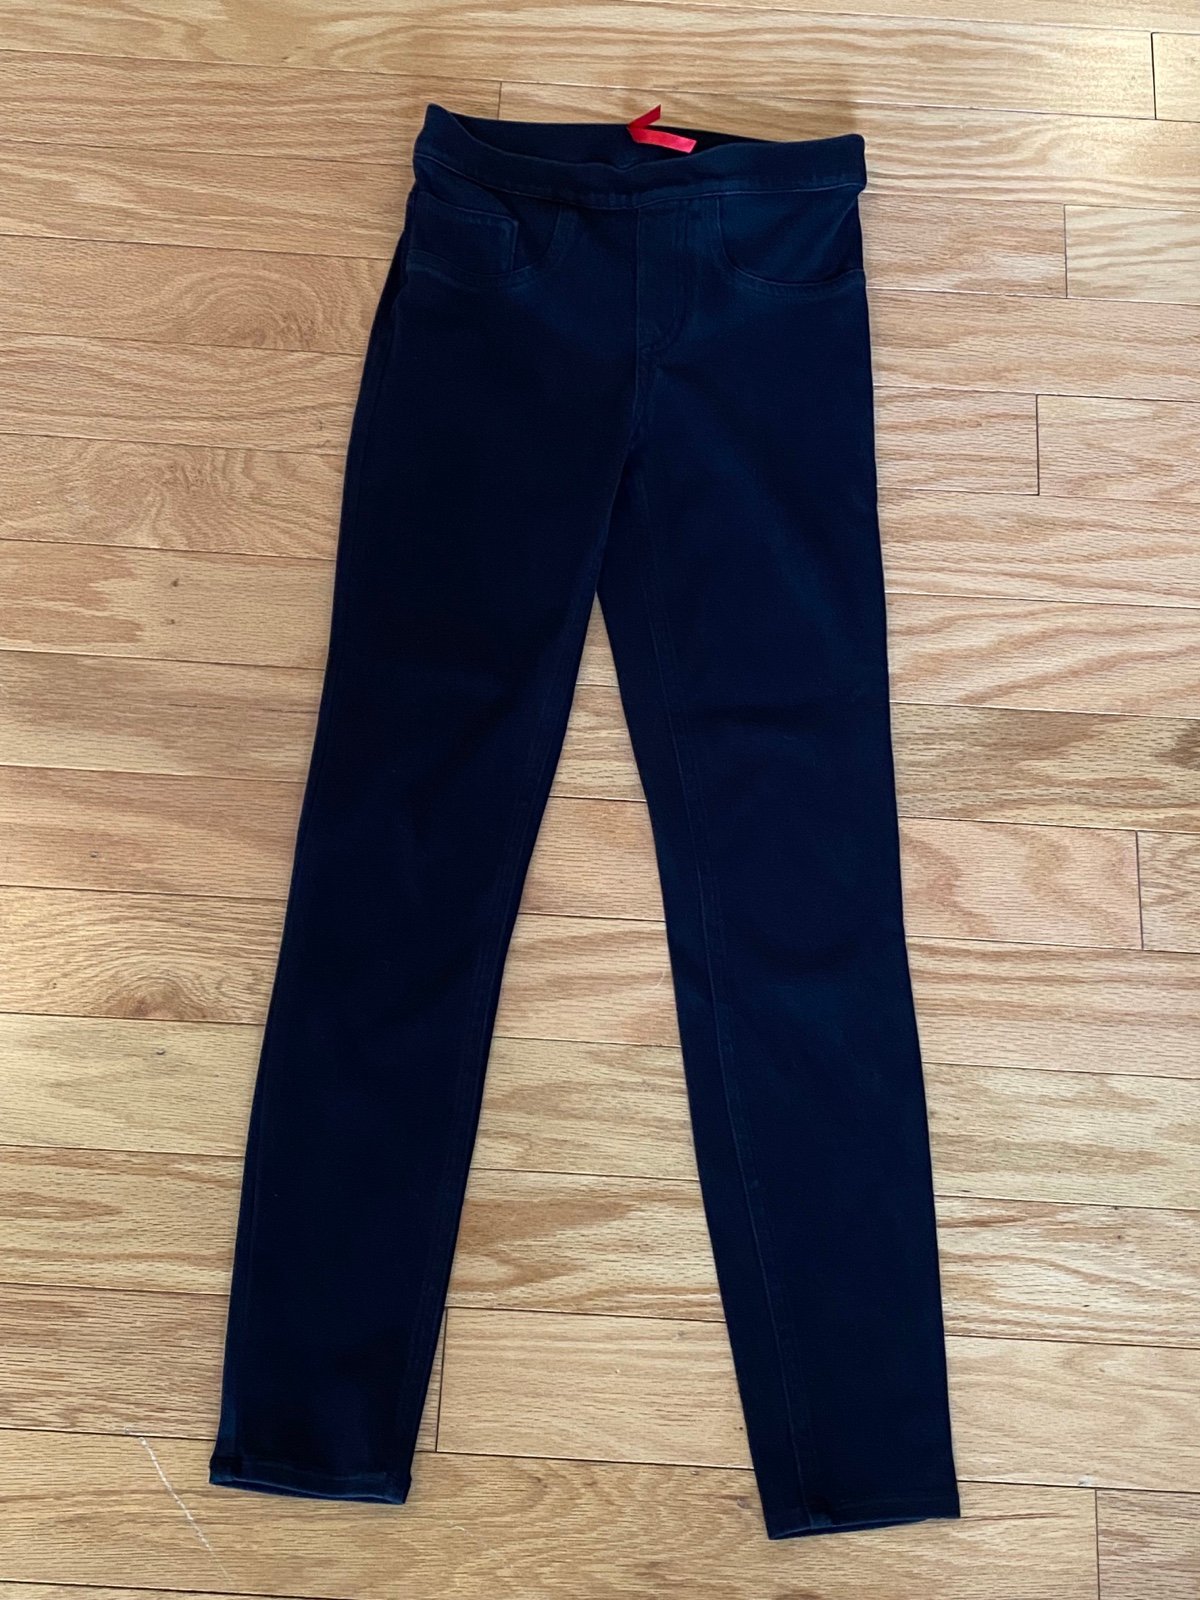 Affordable Spanx Jean-ish Ankle Pull On Leggings Jeggin